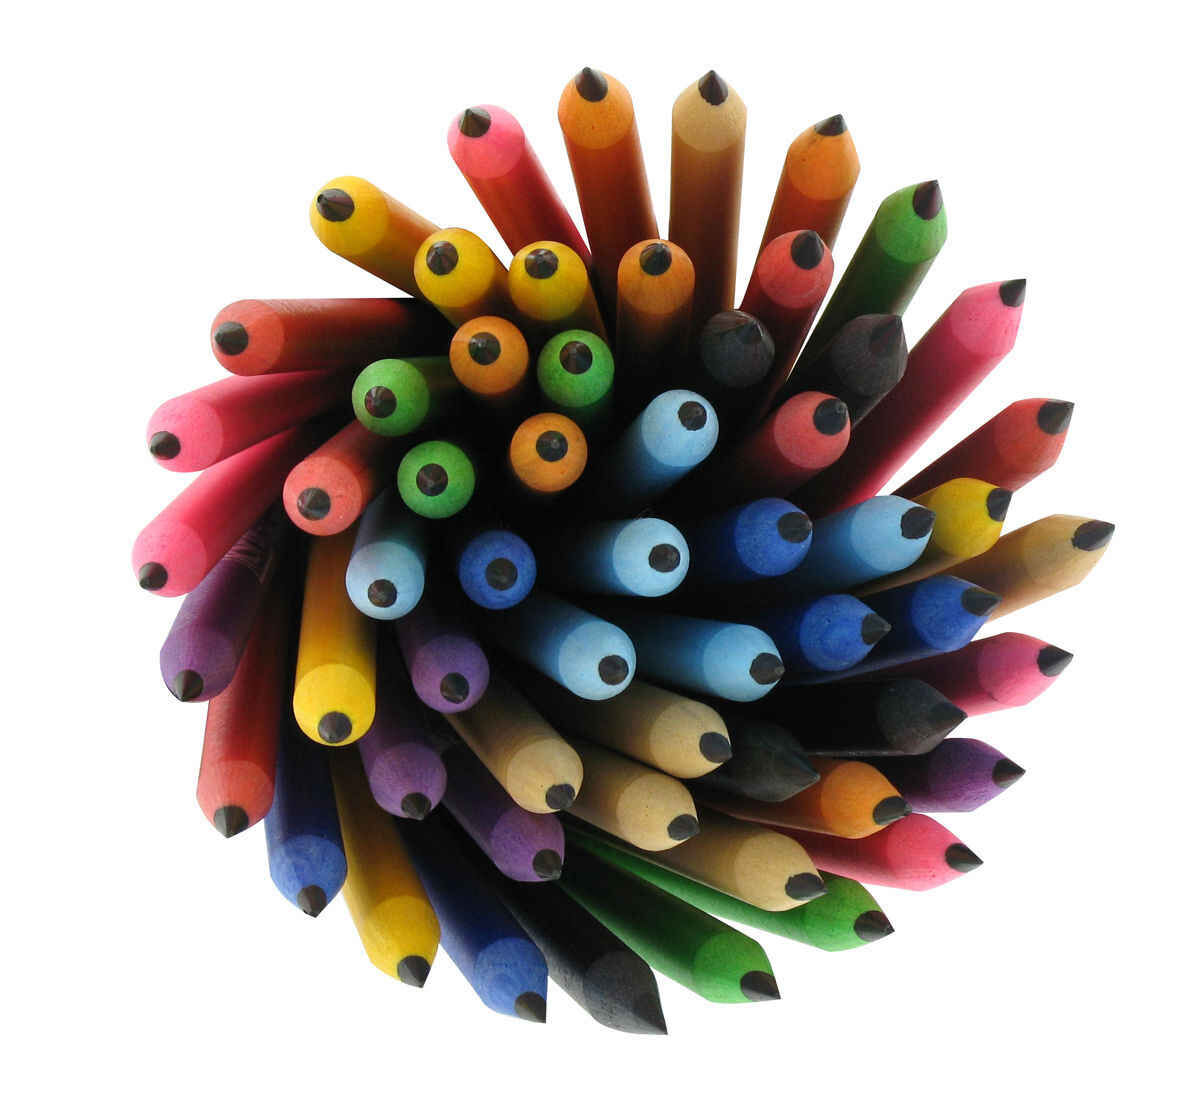 Pencils made from Recycled CD Cases